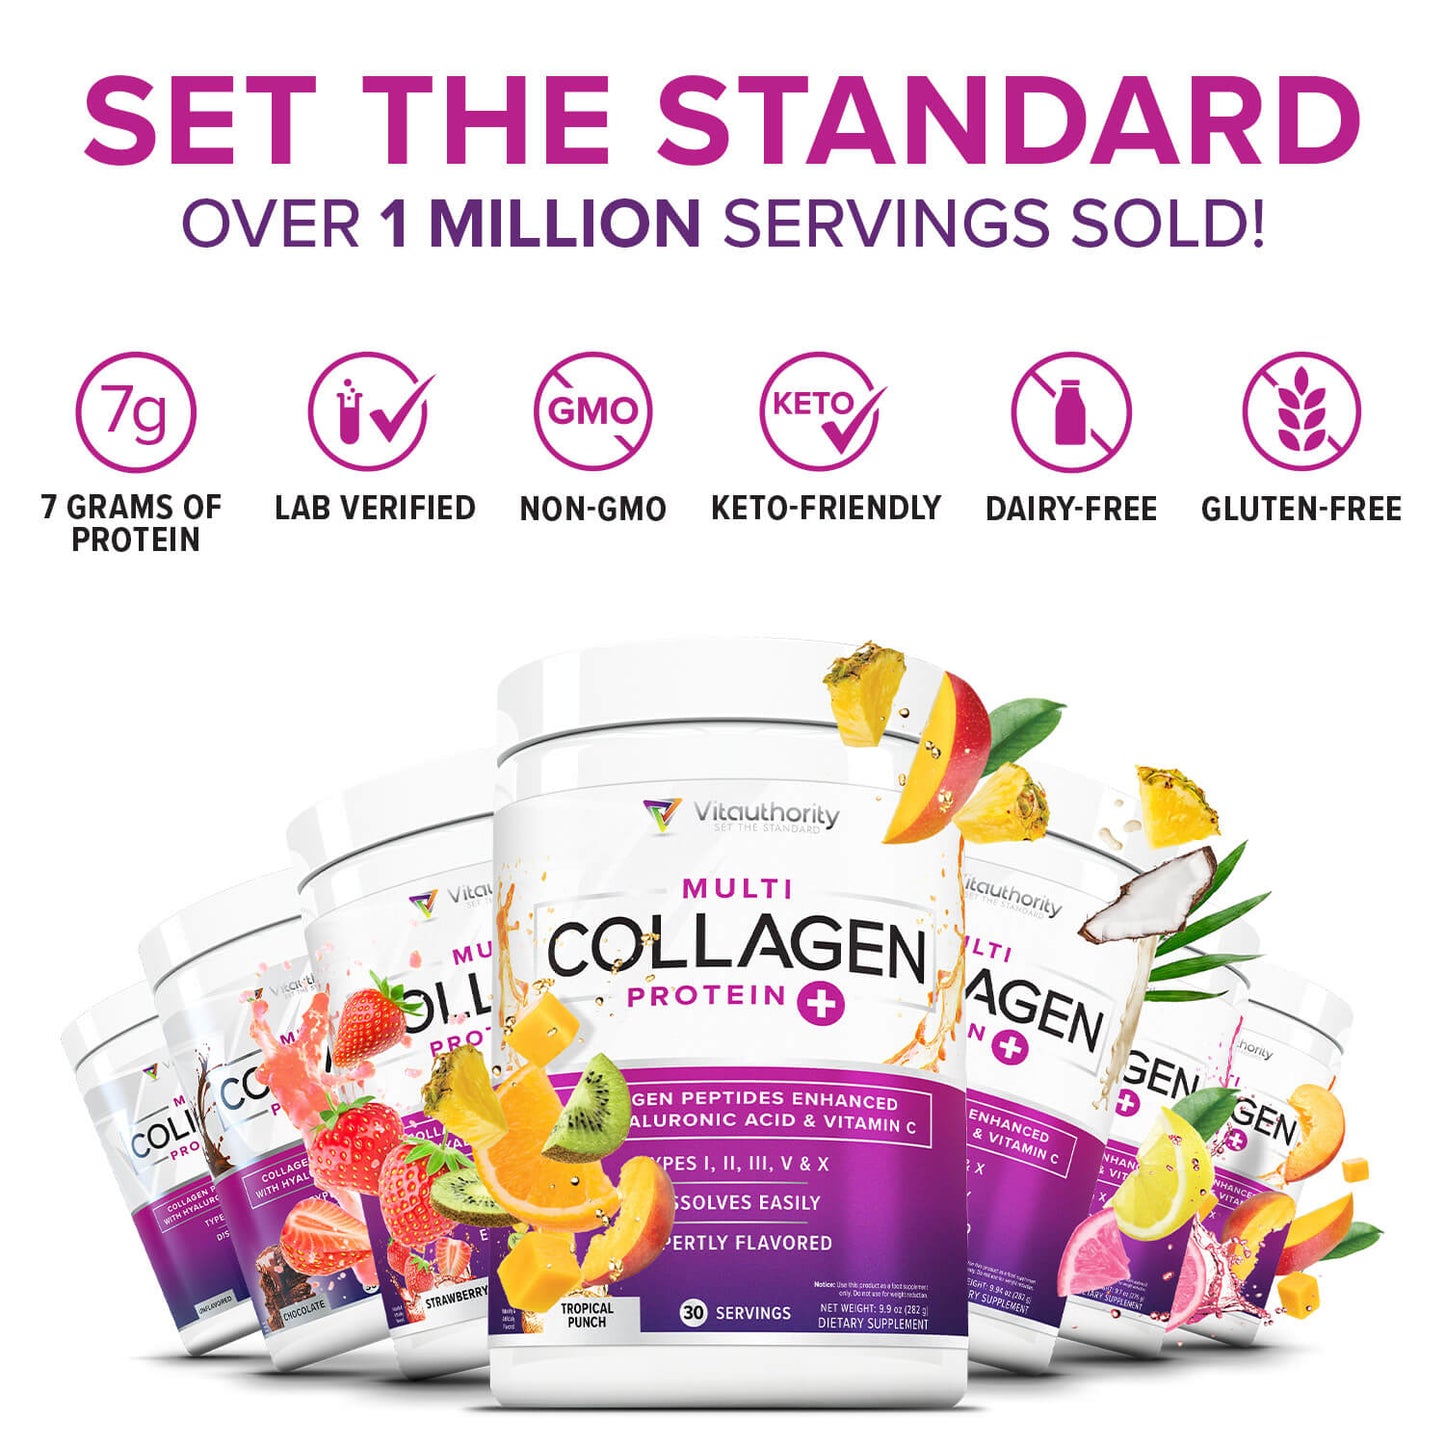 Multi Collagen Peptides - Tropical Punch